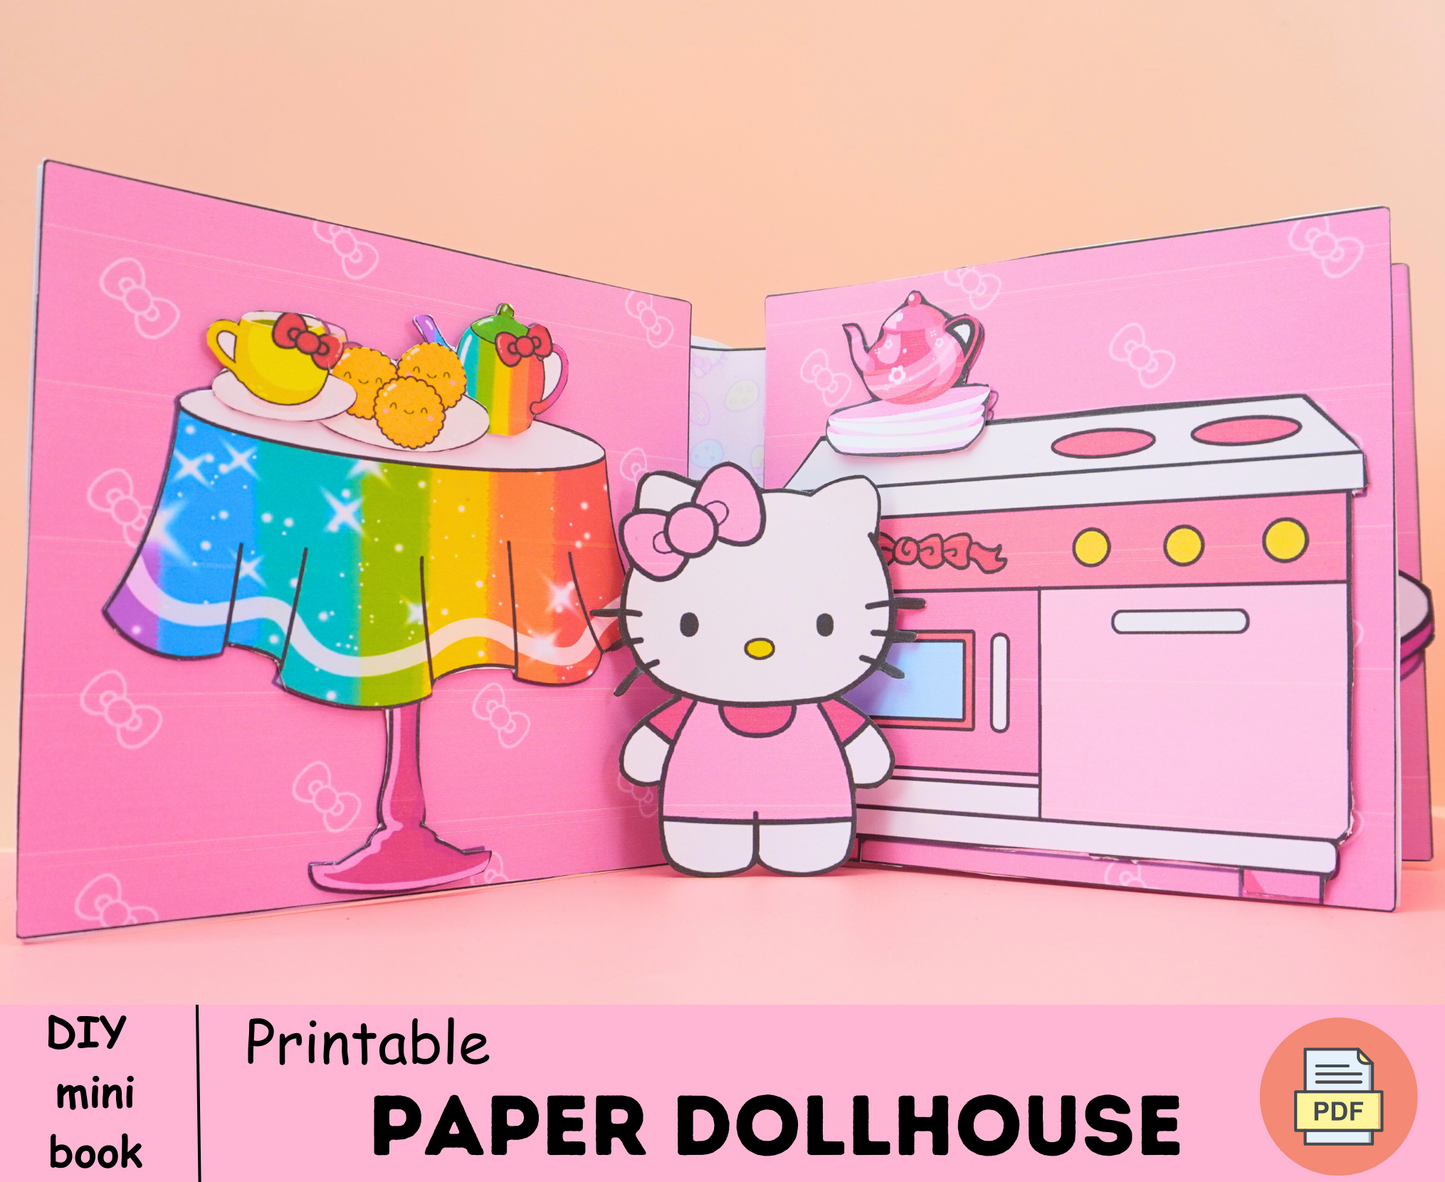 Pinky Kitty Apartment Dollhouse busy book print for baby 👶 Handmade toddler activity book | Paper dollhouse folding printed  🌈 Woa Doll Crafts